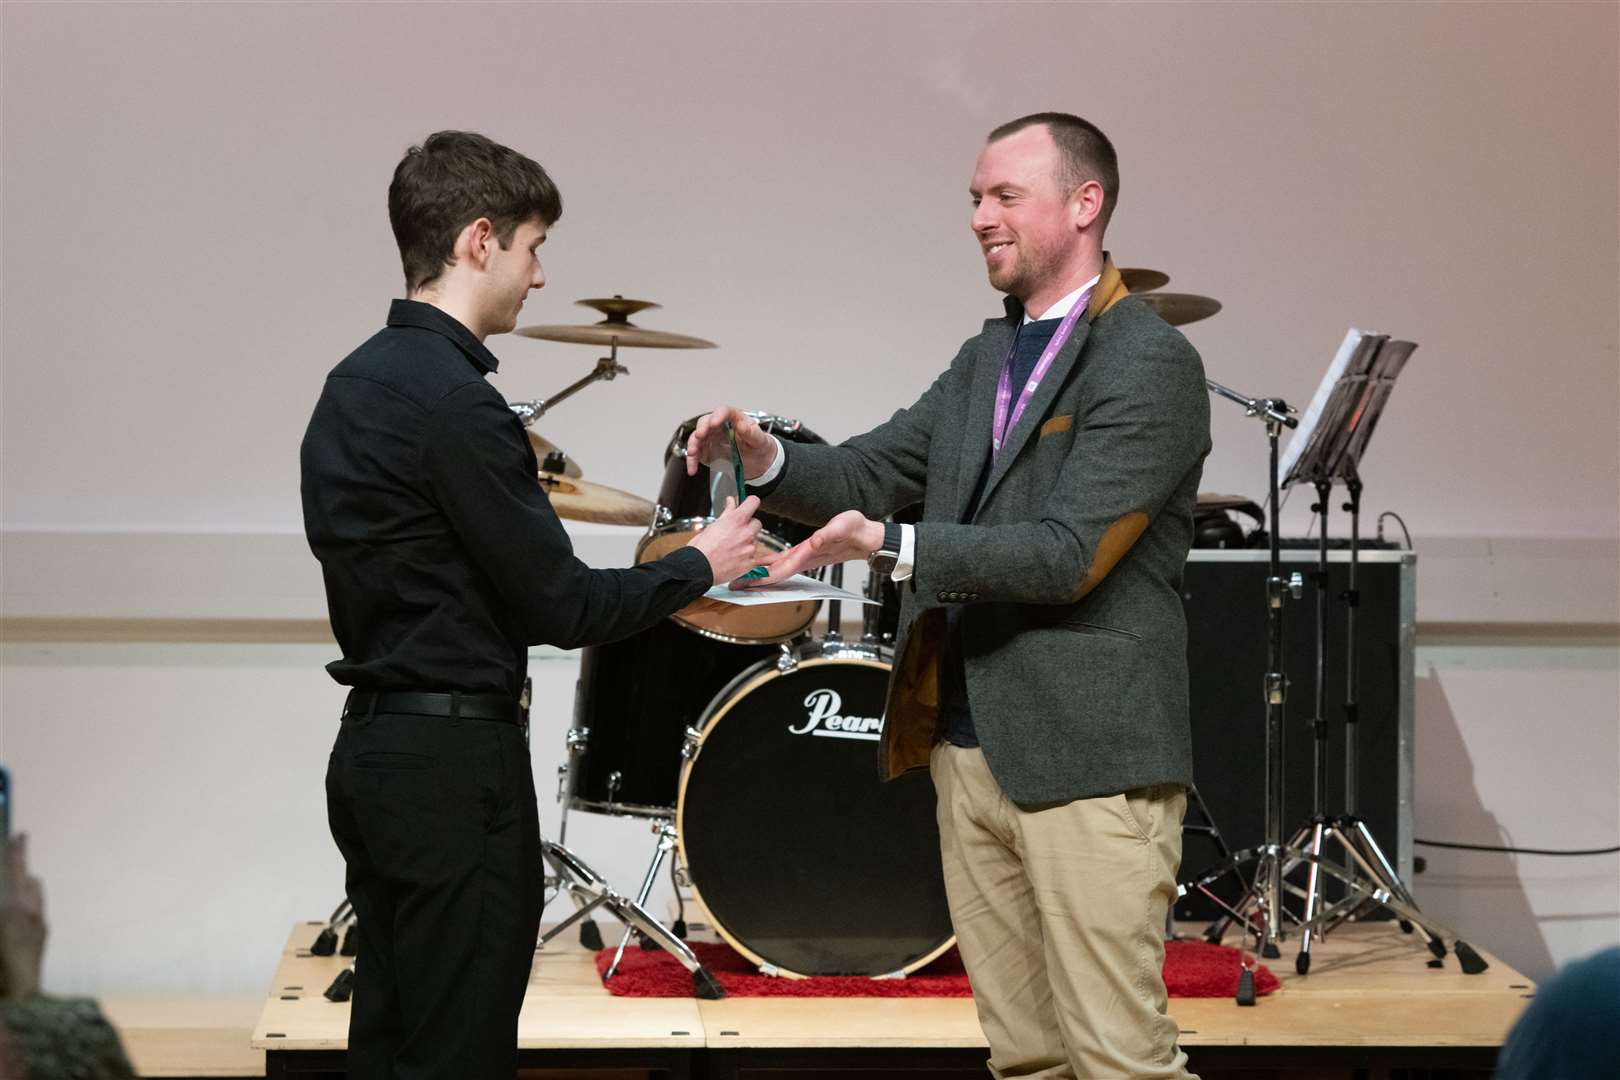 Alexander Davidson presenting the first place award to Edward Clark from Forres Academy.